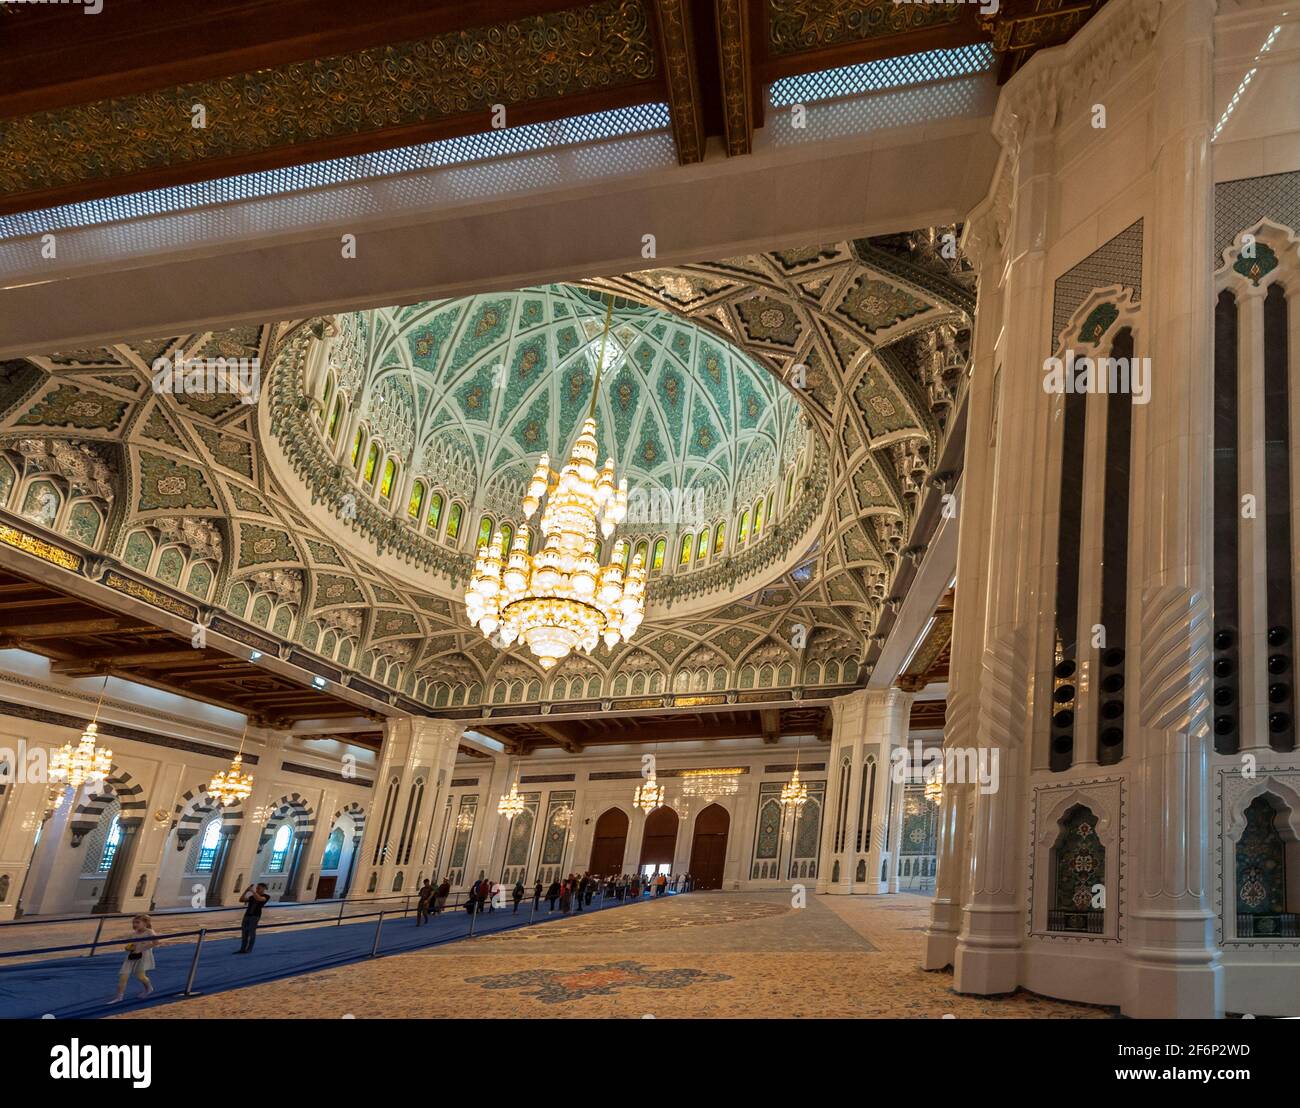 The main prayer hall of the Sultan Qaboos Grand Mosque, Muscat, Oman Stock Photo